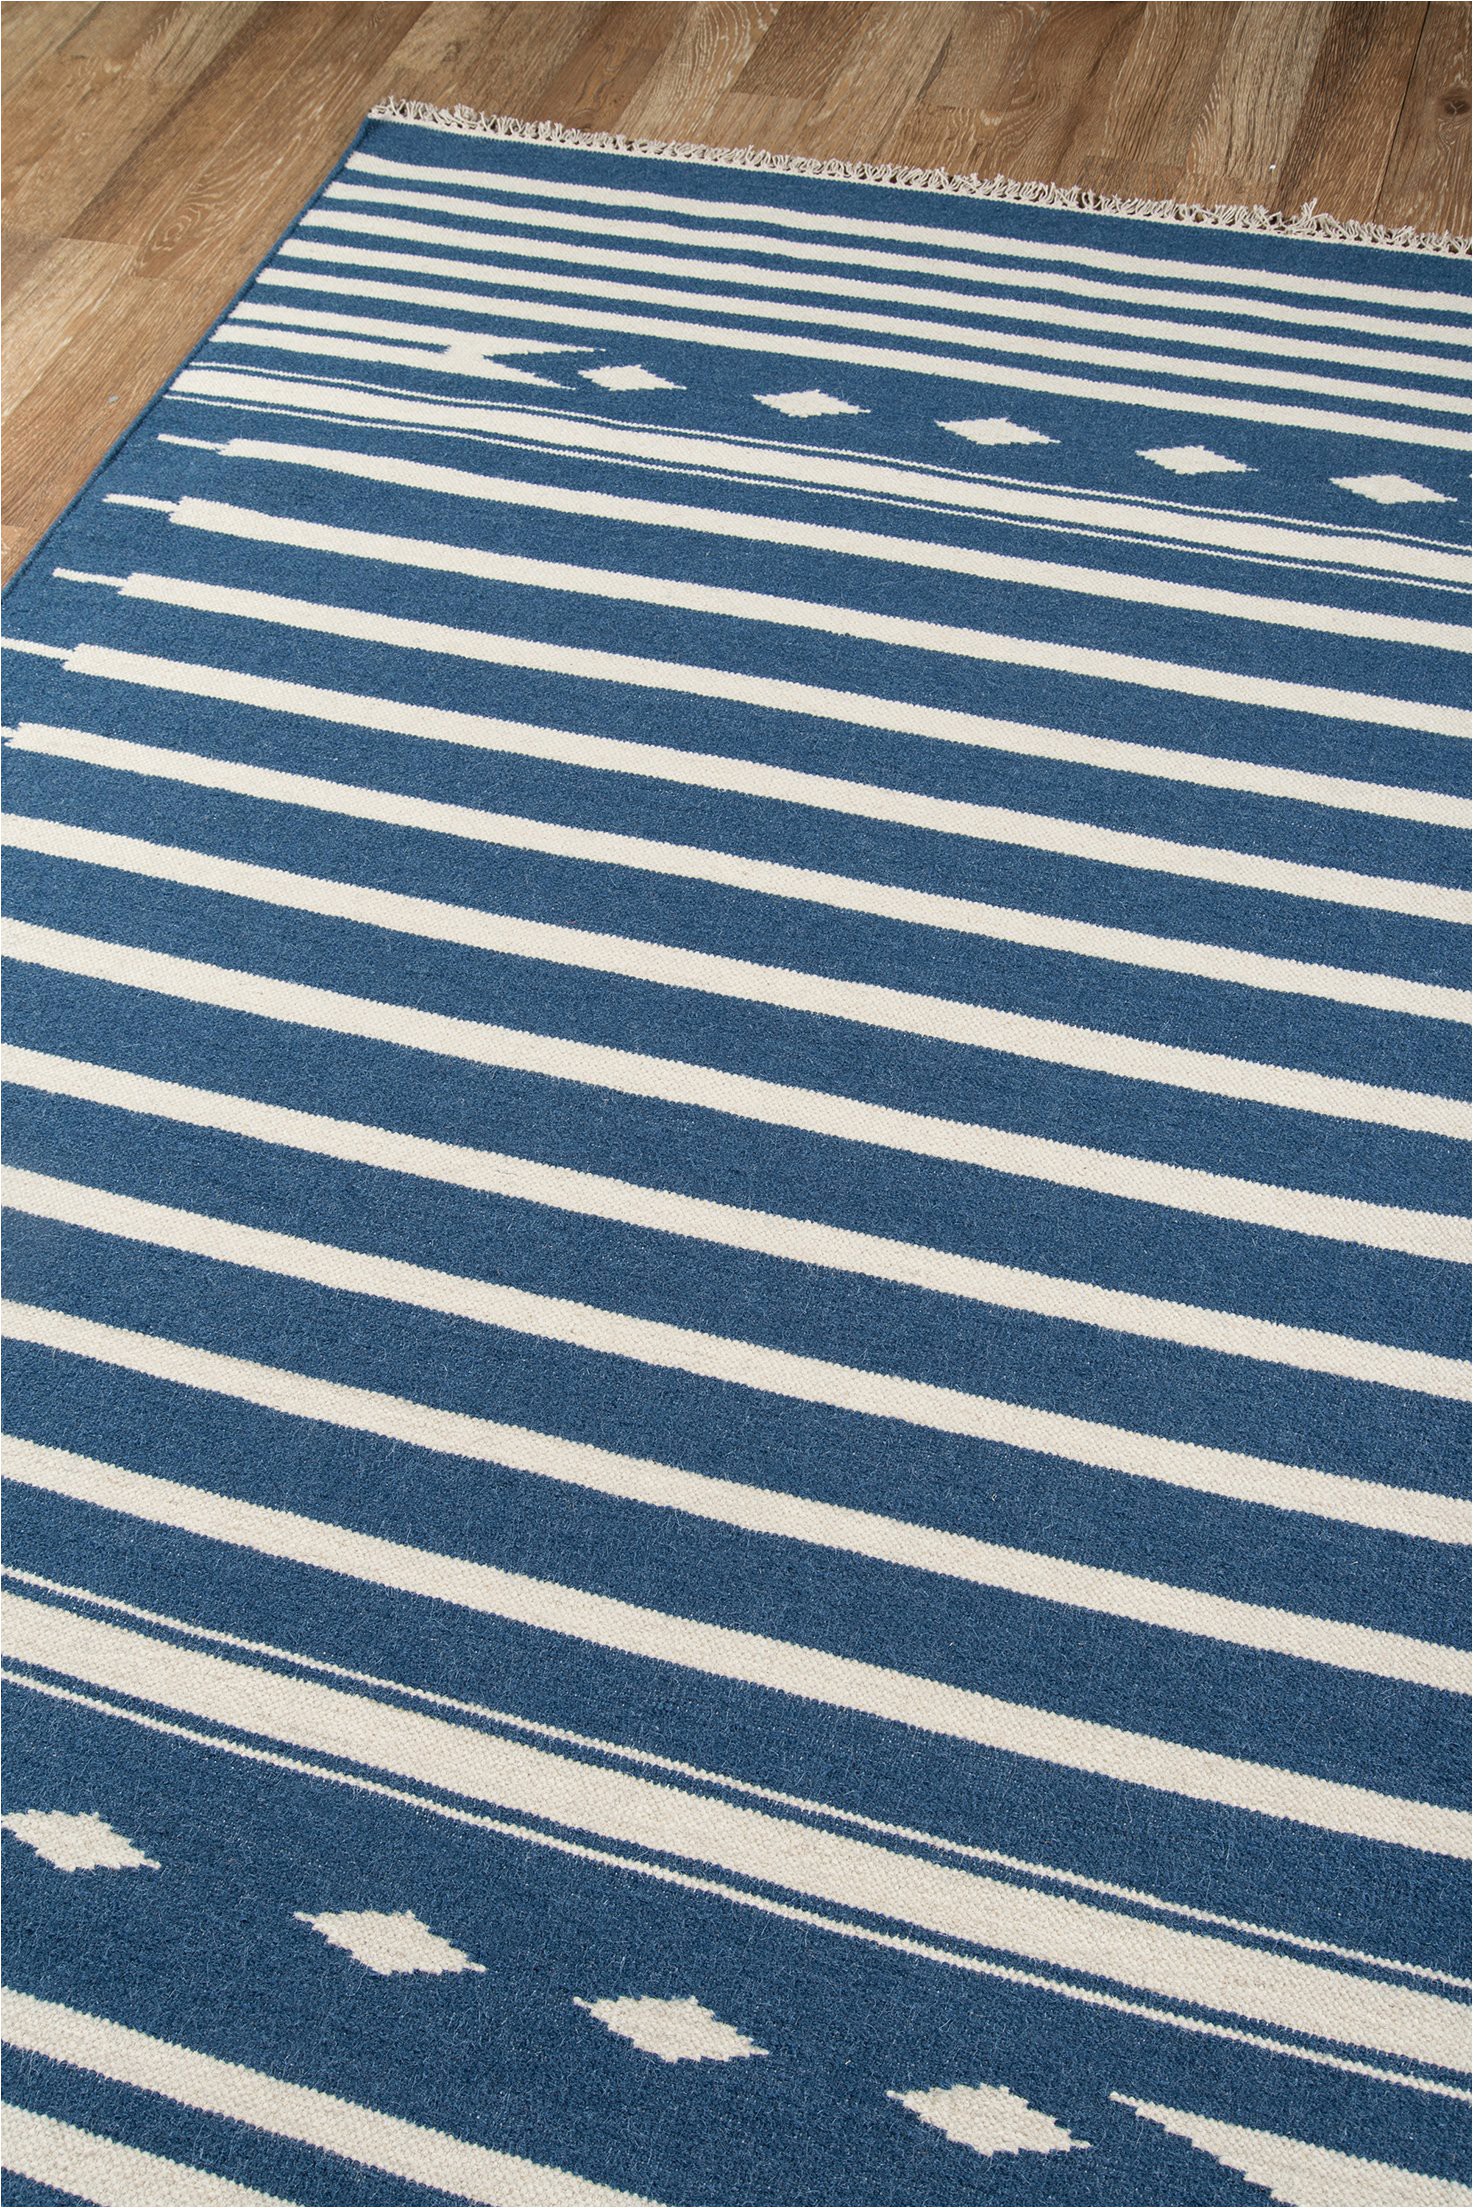 Blue and White Striped Rug 8×10 southwestern area Rugs Woodwaves